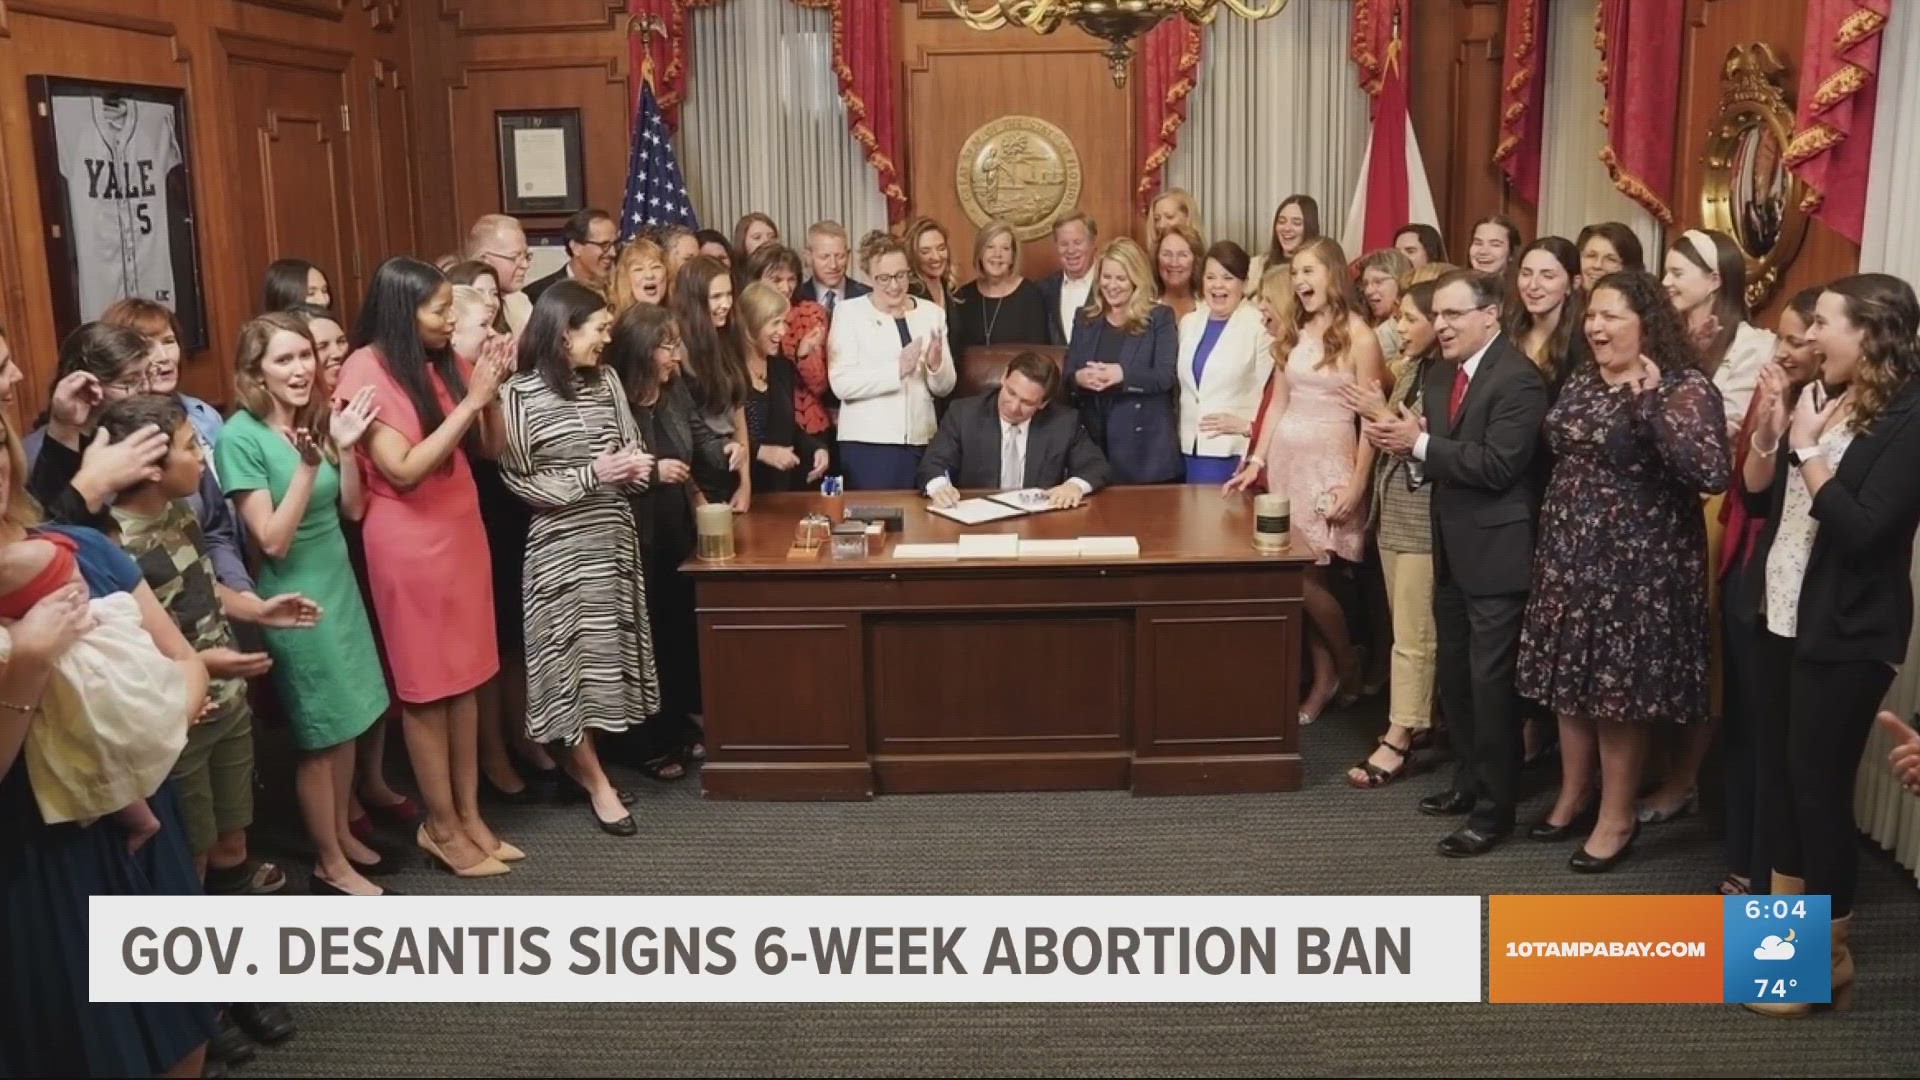 The new abortion law puts Florida in a similar position as Georgia, banning most abortions after 6 weeks of pregnancy. It does include a few exceptions.